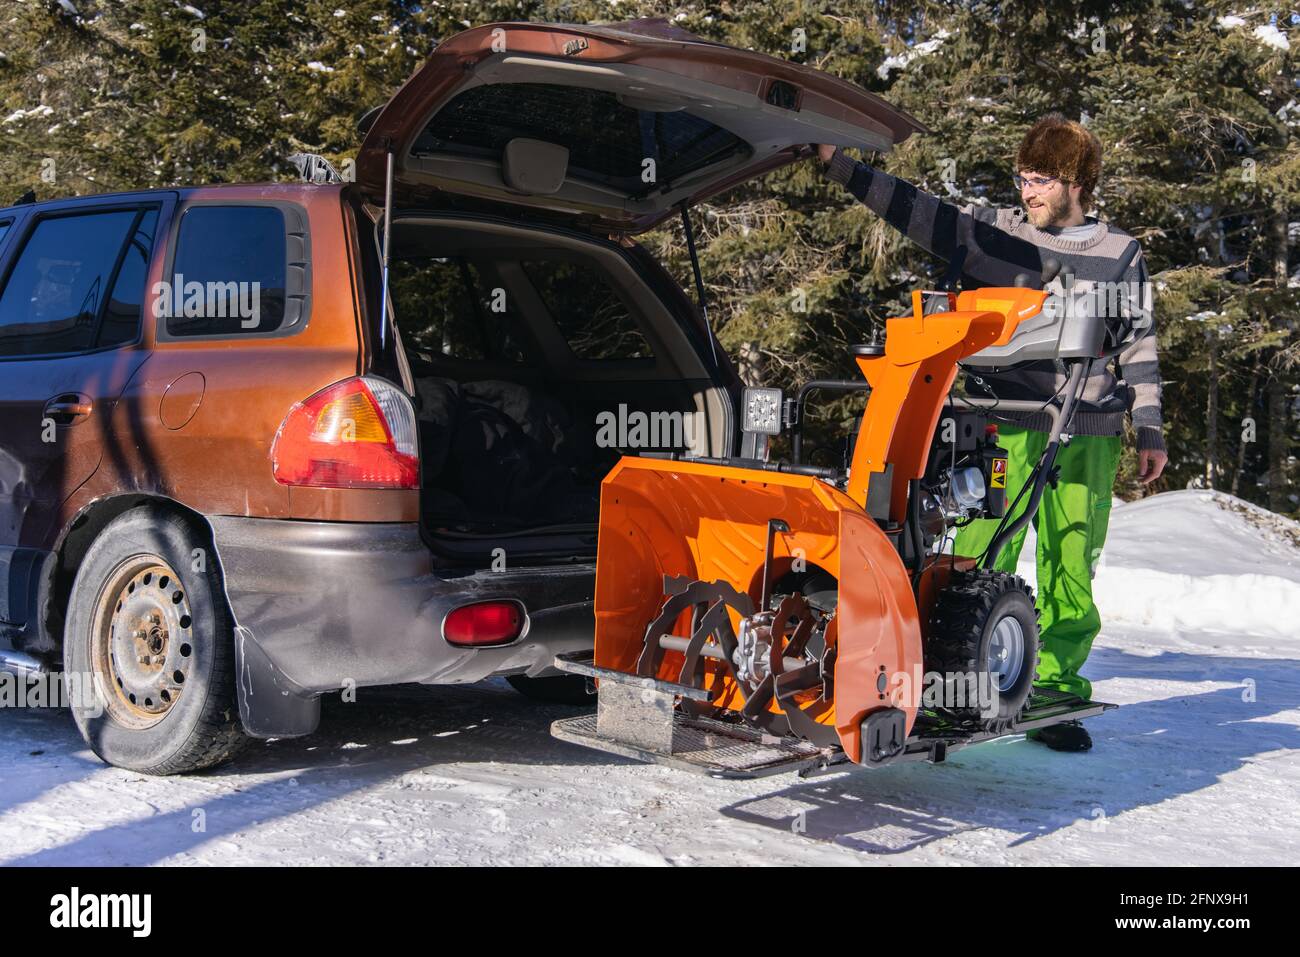 Wide angle shot of a bright orange mechanical snowplough being downloaded from the trunk of a car and ready to be used for fresh snow removal. Stock Photo